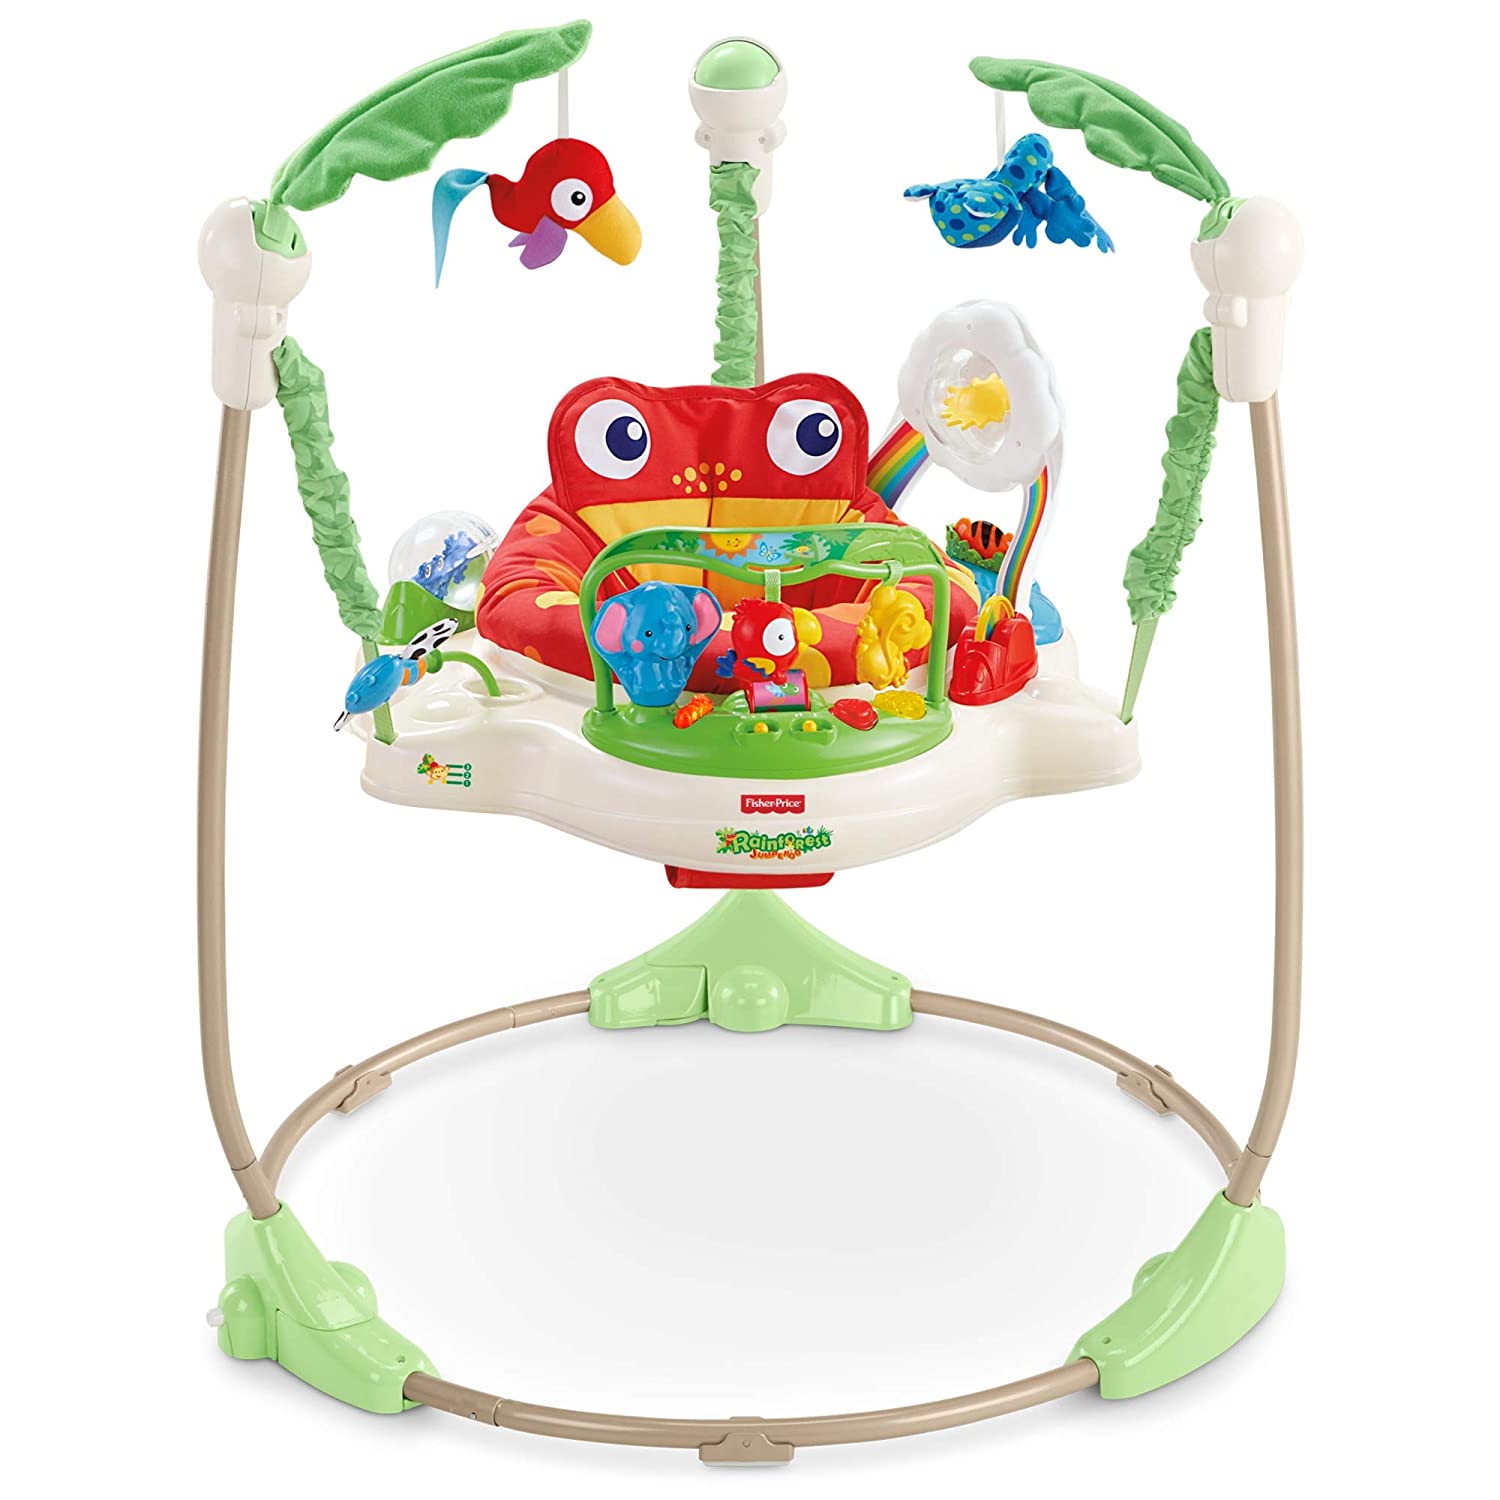 7 Best Fisher Price Jumperoo Reviews in 2022 1